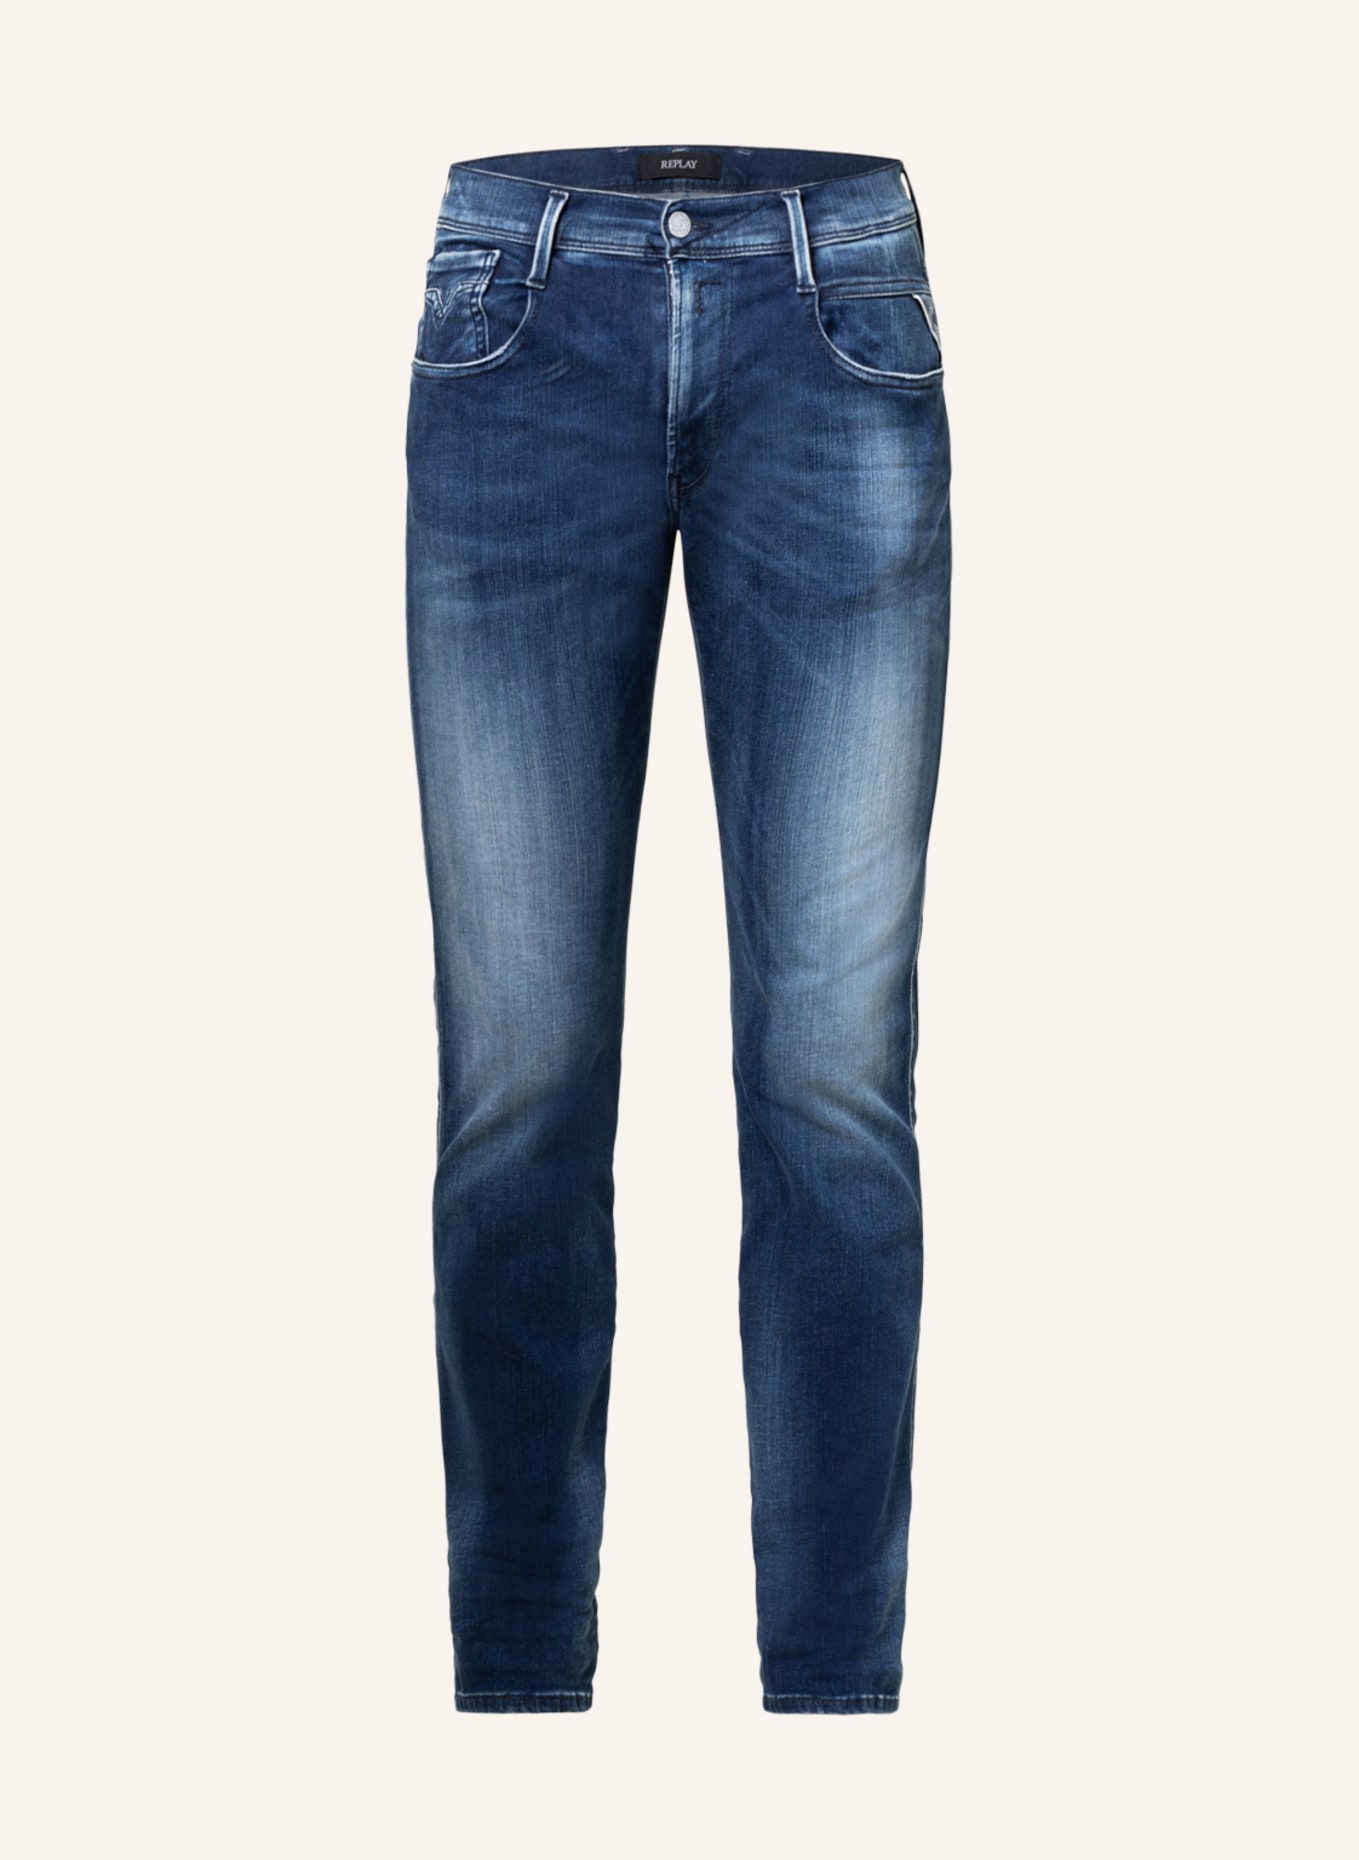 REPLAY Jeans ANBASS RE-USED Slim Fit, Farbe: 009 MEDIUM BLUE(Bild null)